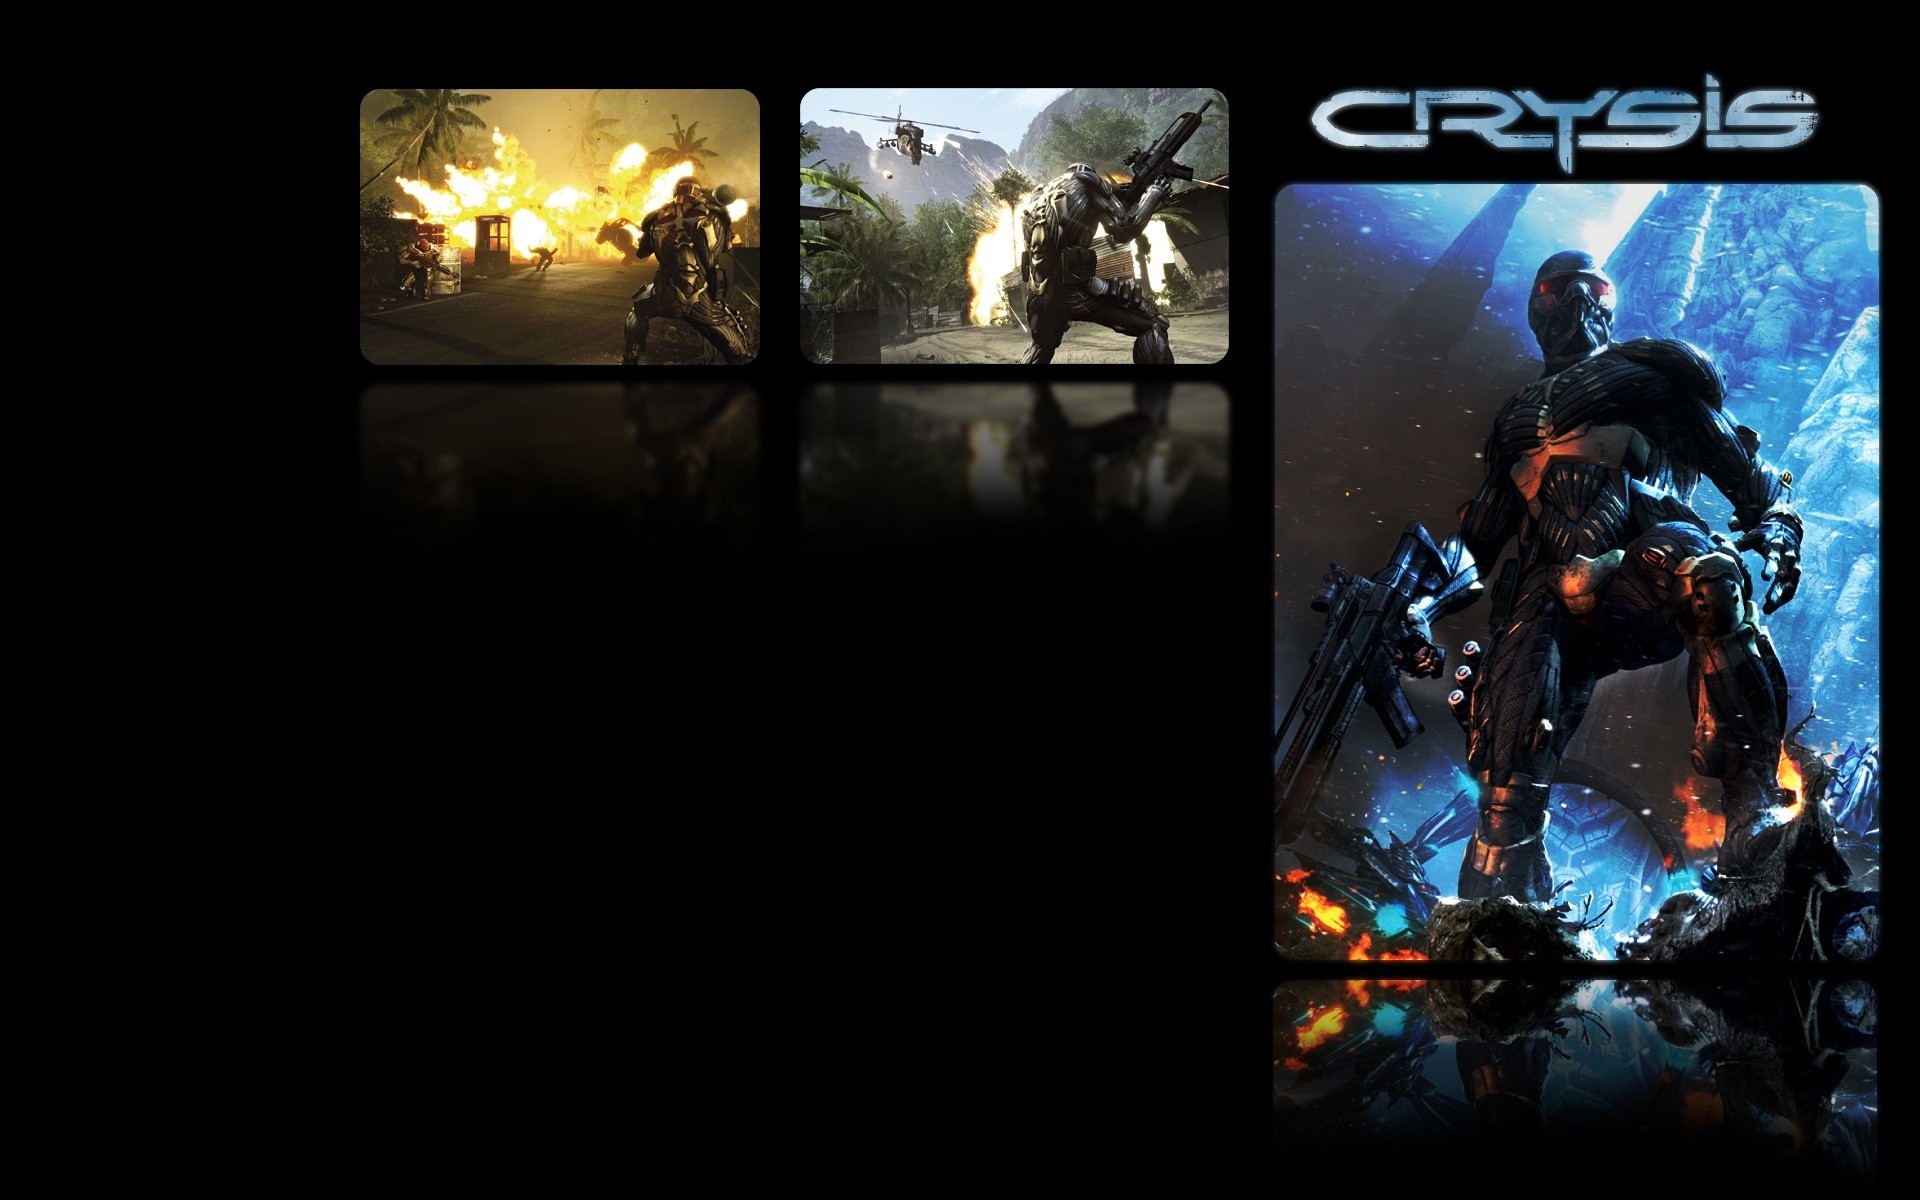 Video Game Crysis HD Wallpaper | Background Image